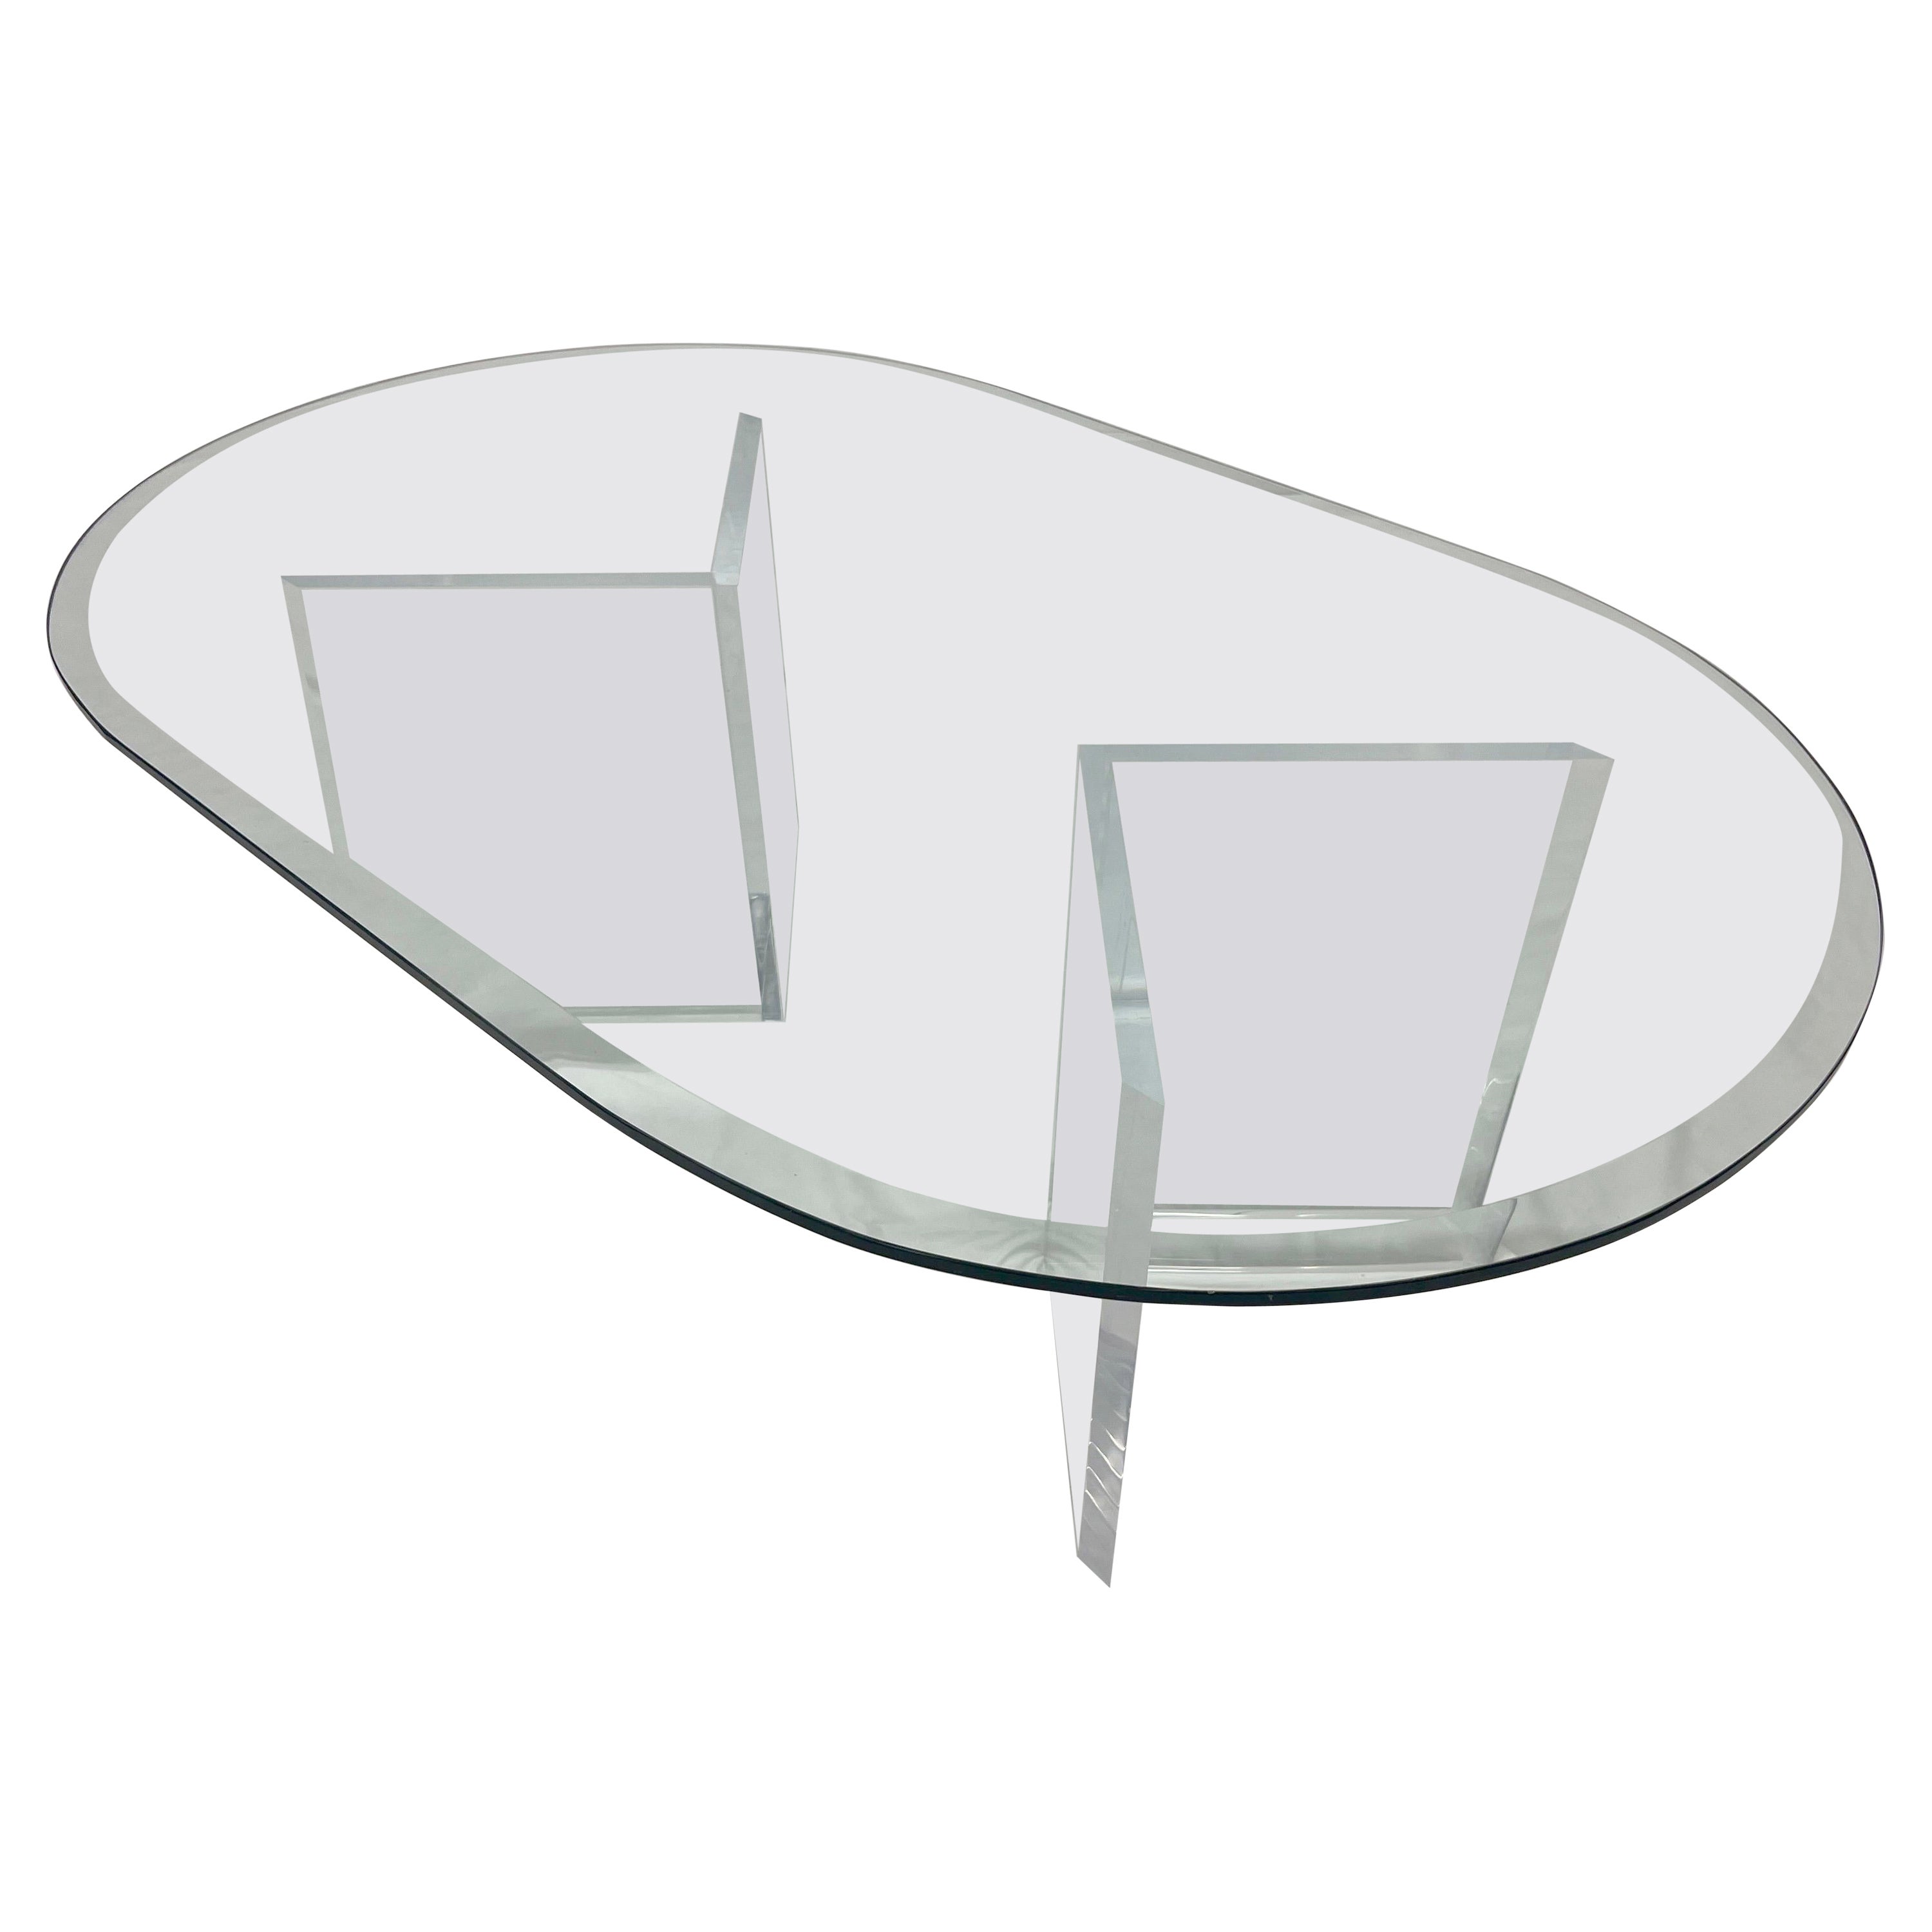 1970s, Postmodern Lucite and Glass Coffee Table